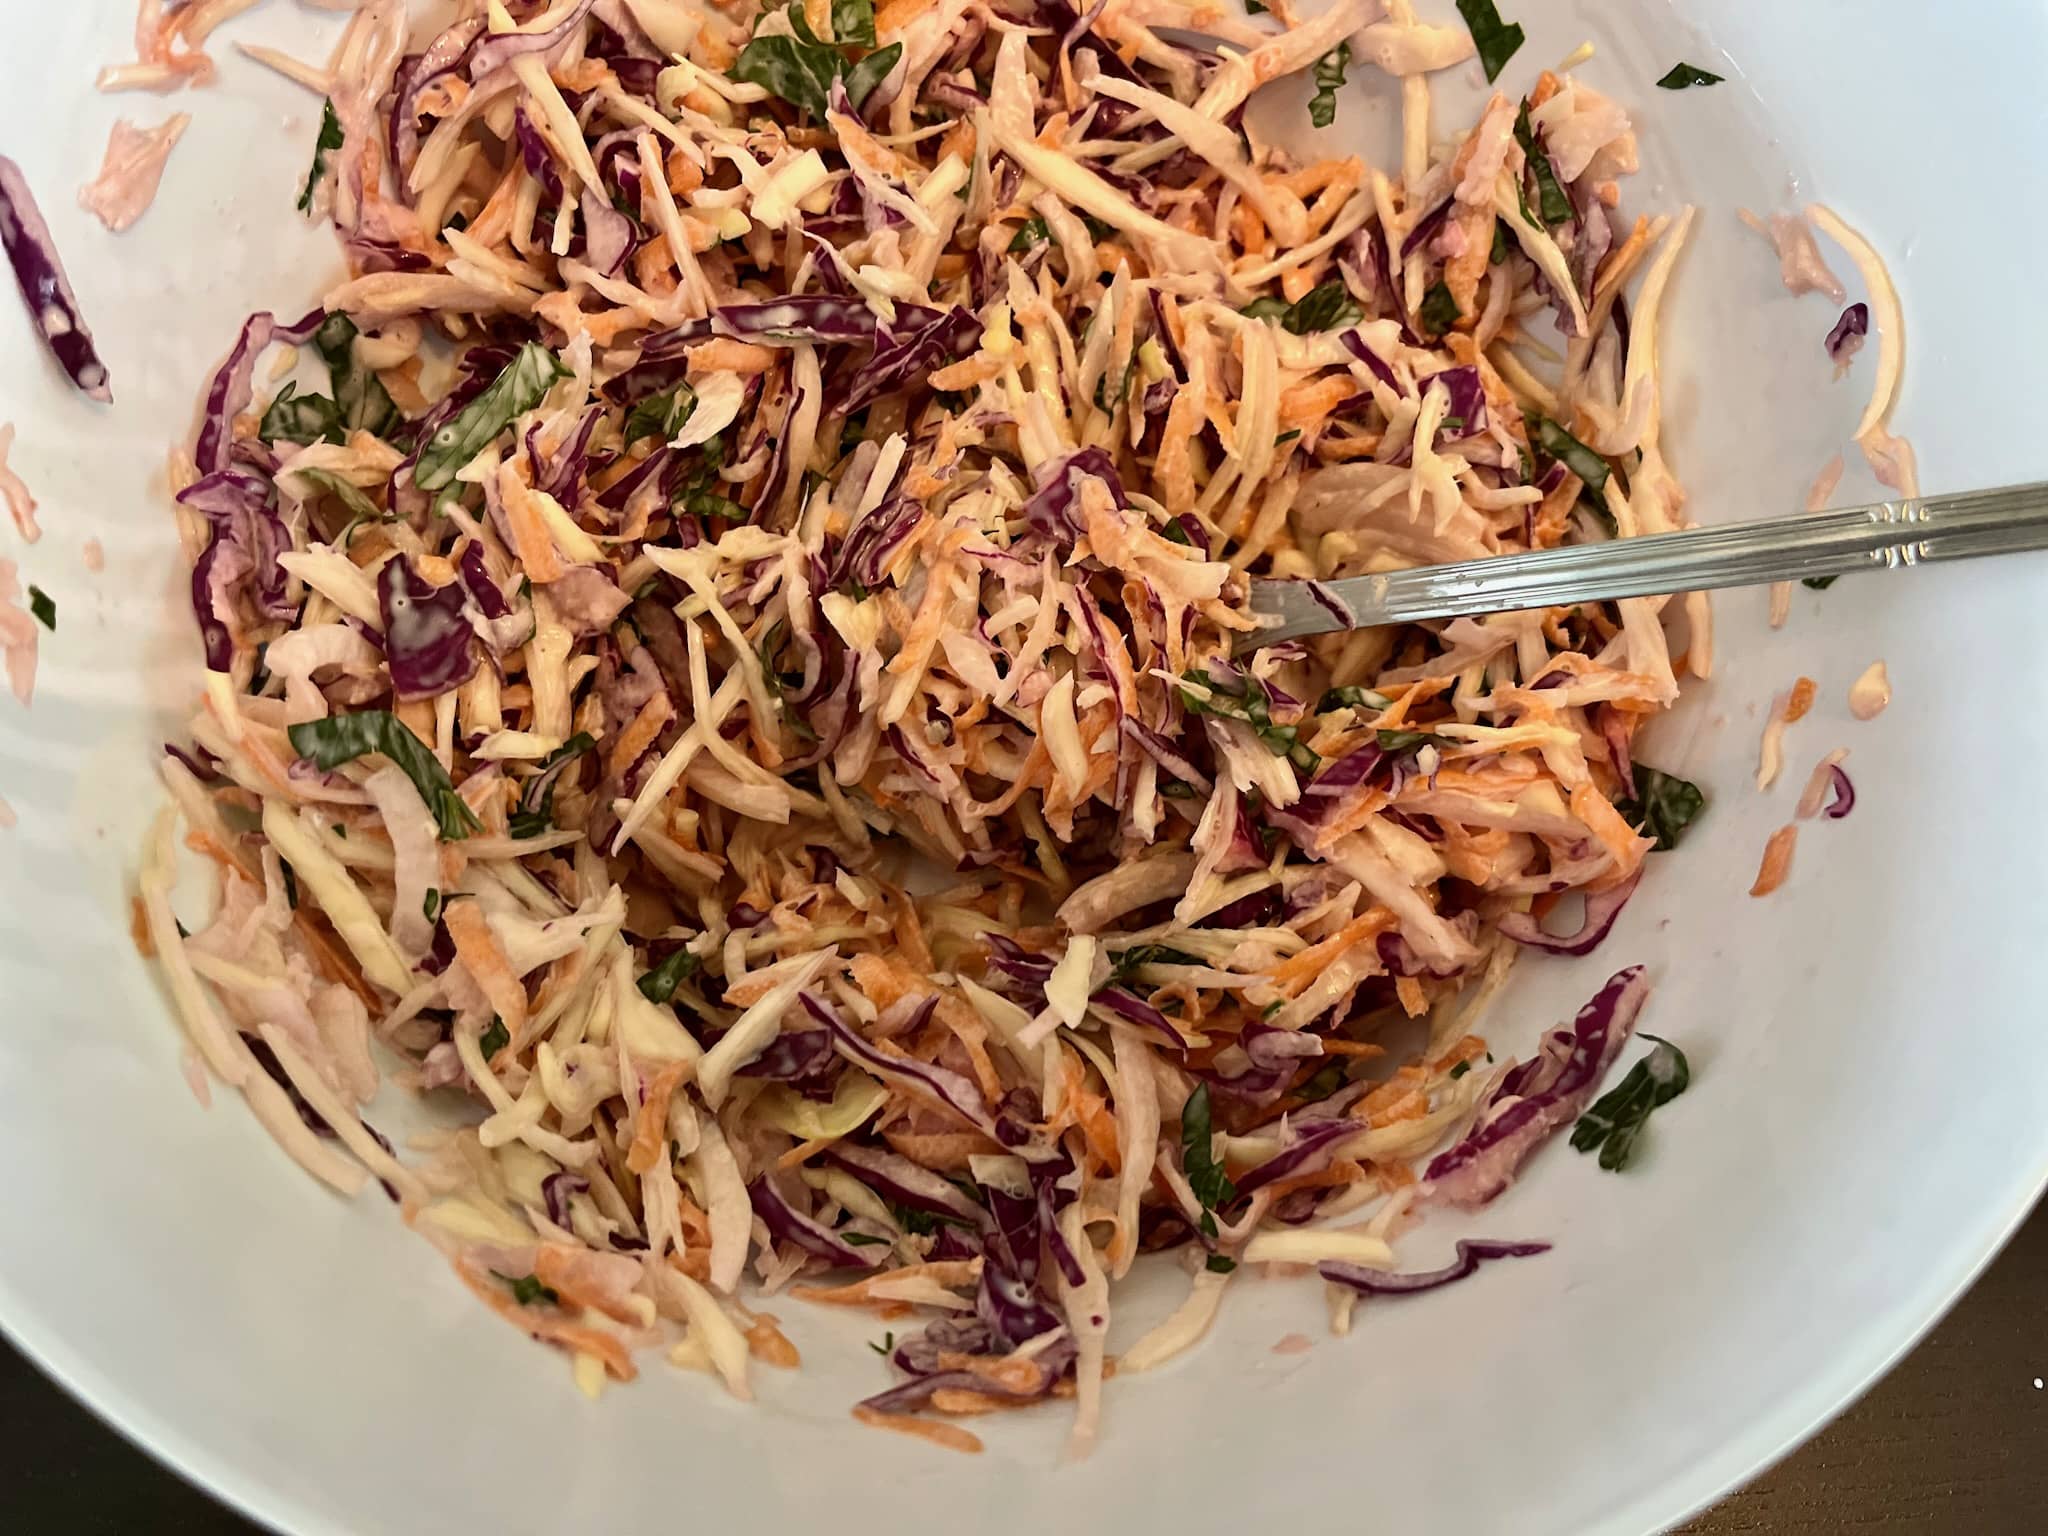 Raw coleslaw mixed with coleslaw dressing creates a perfect salad